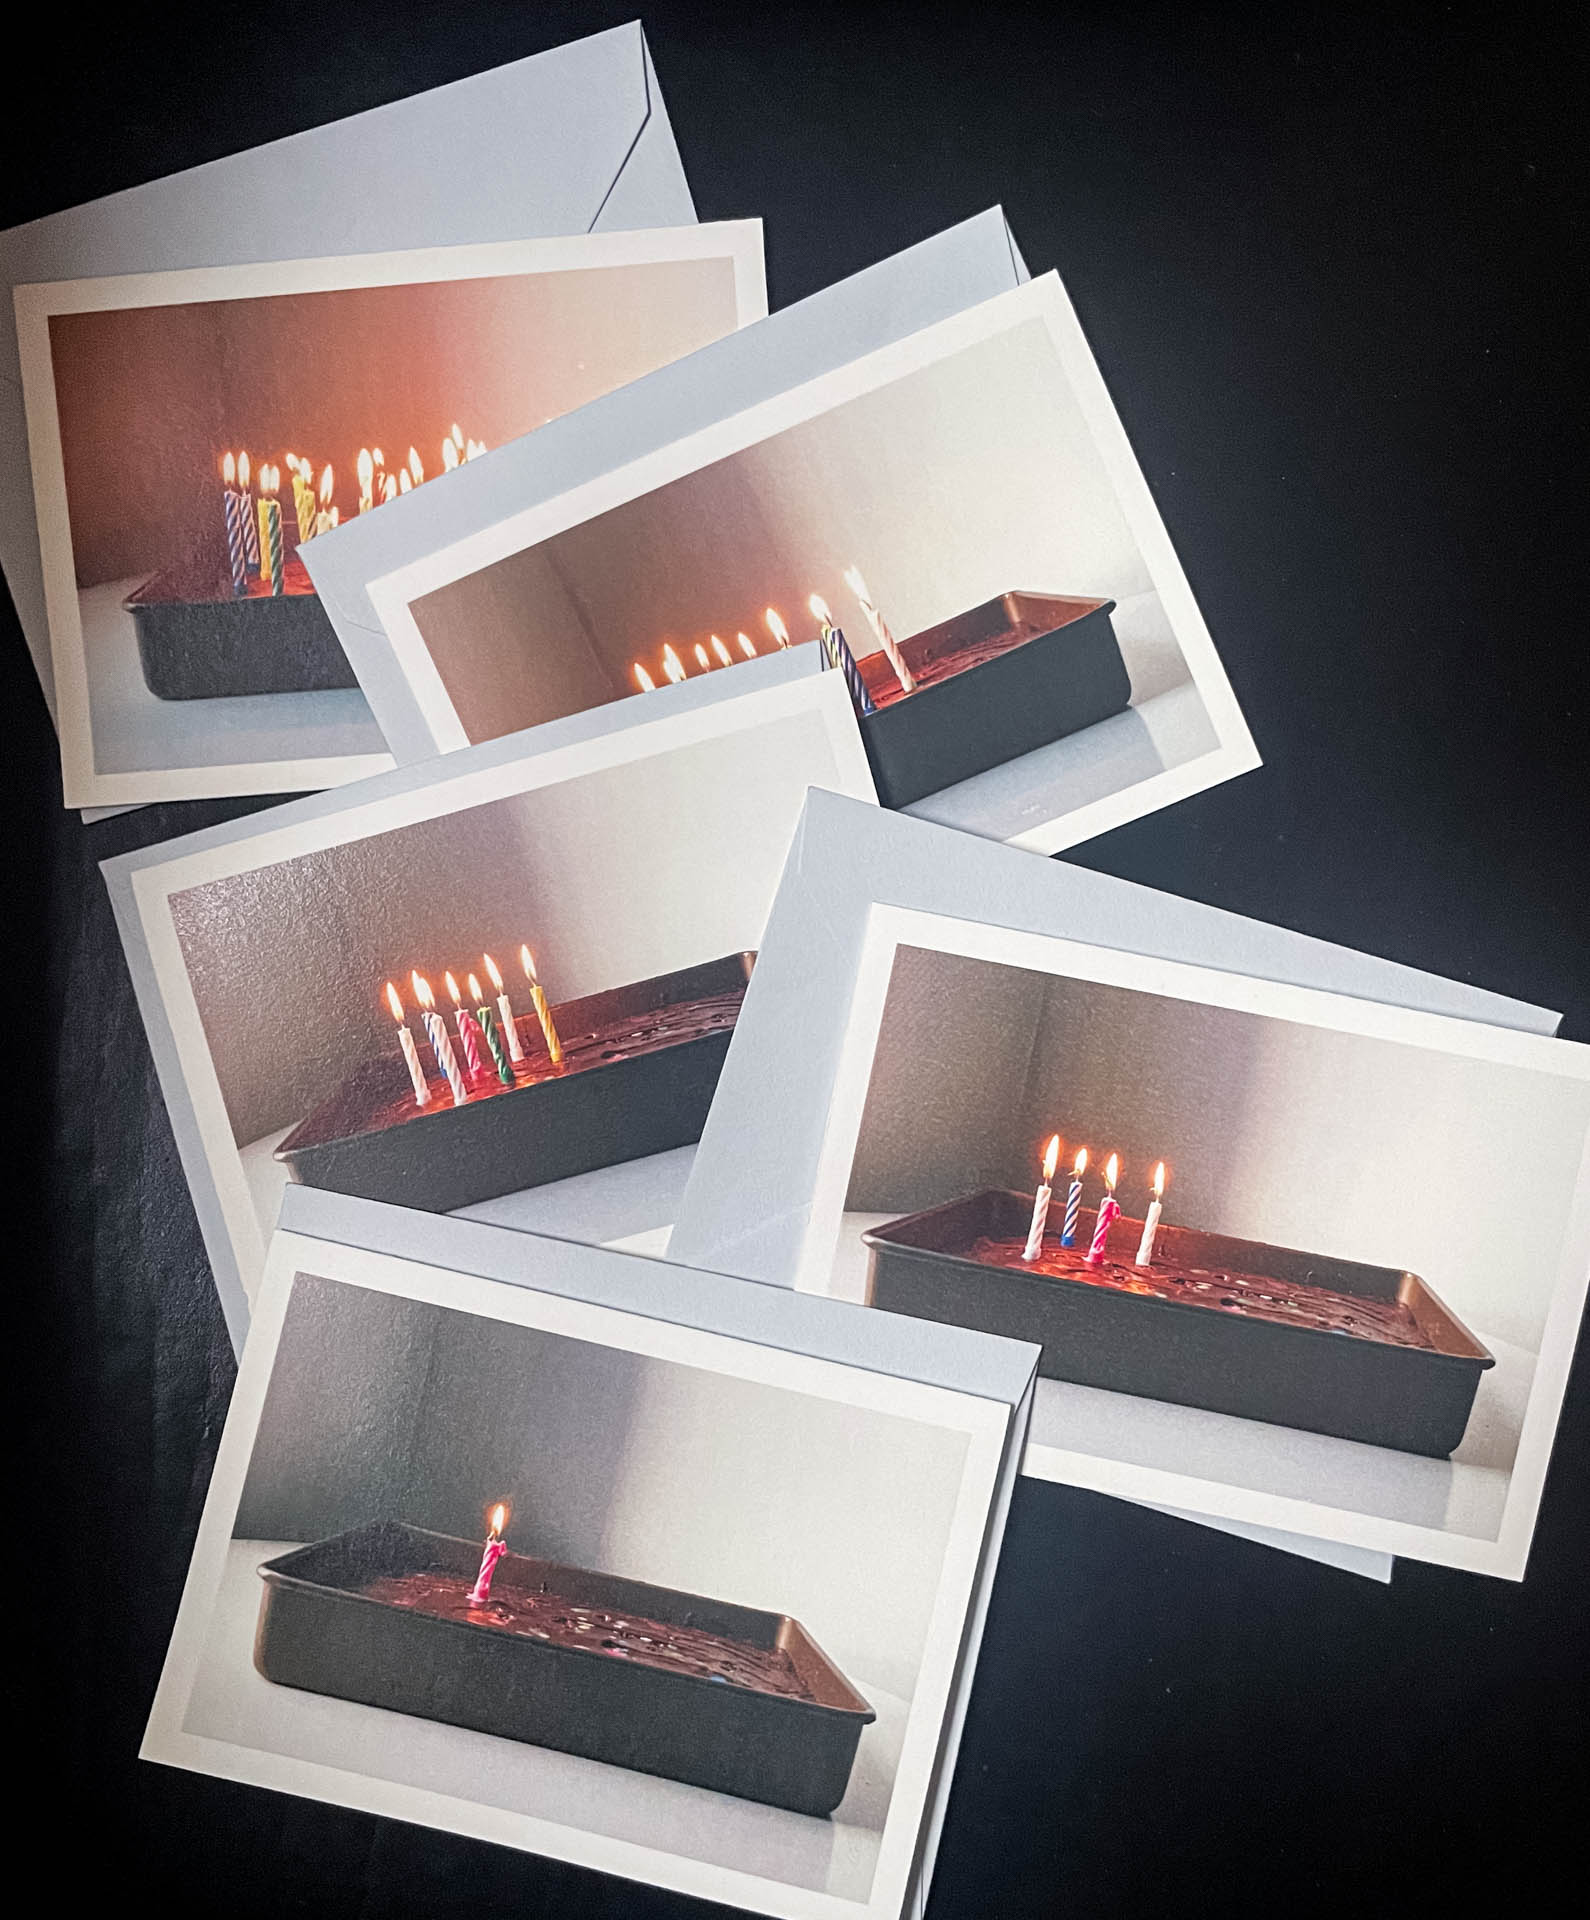 polaroid photos of a cake with candles in it.